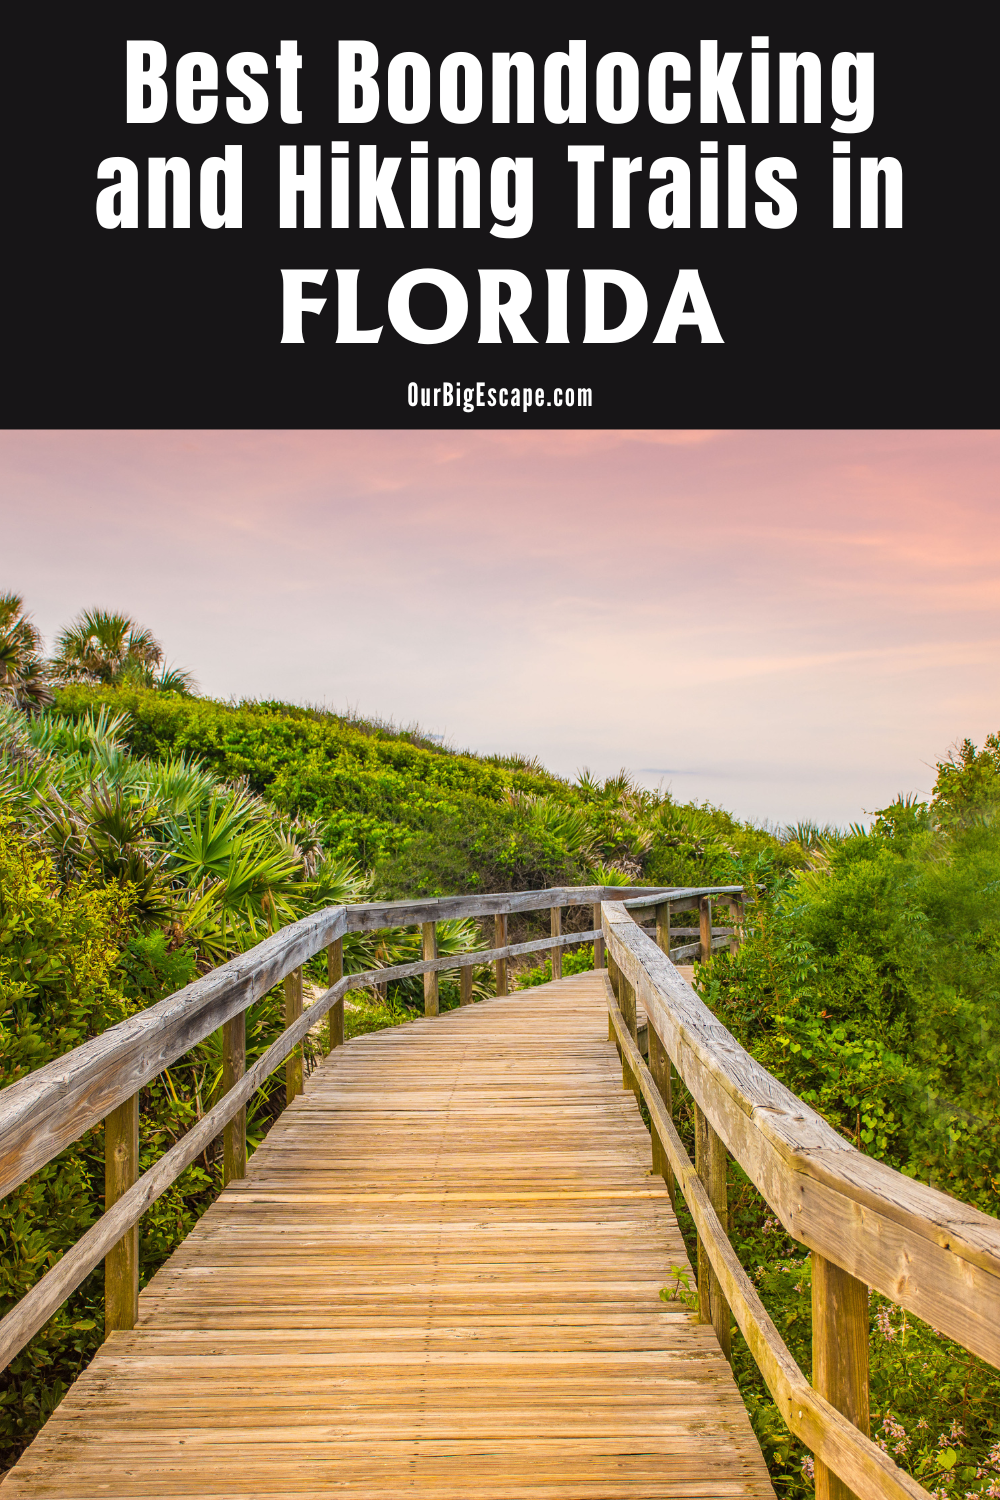 Best Boondocking and Hiking Trails in Florida